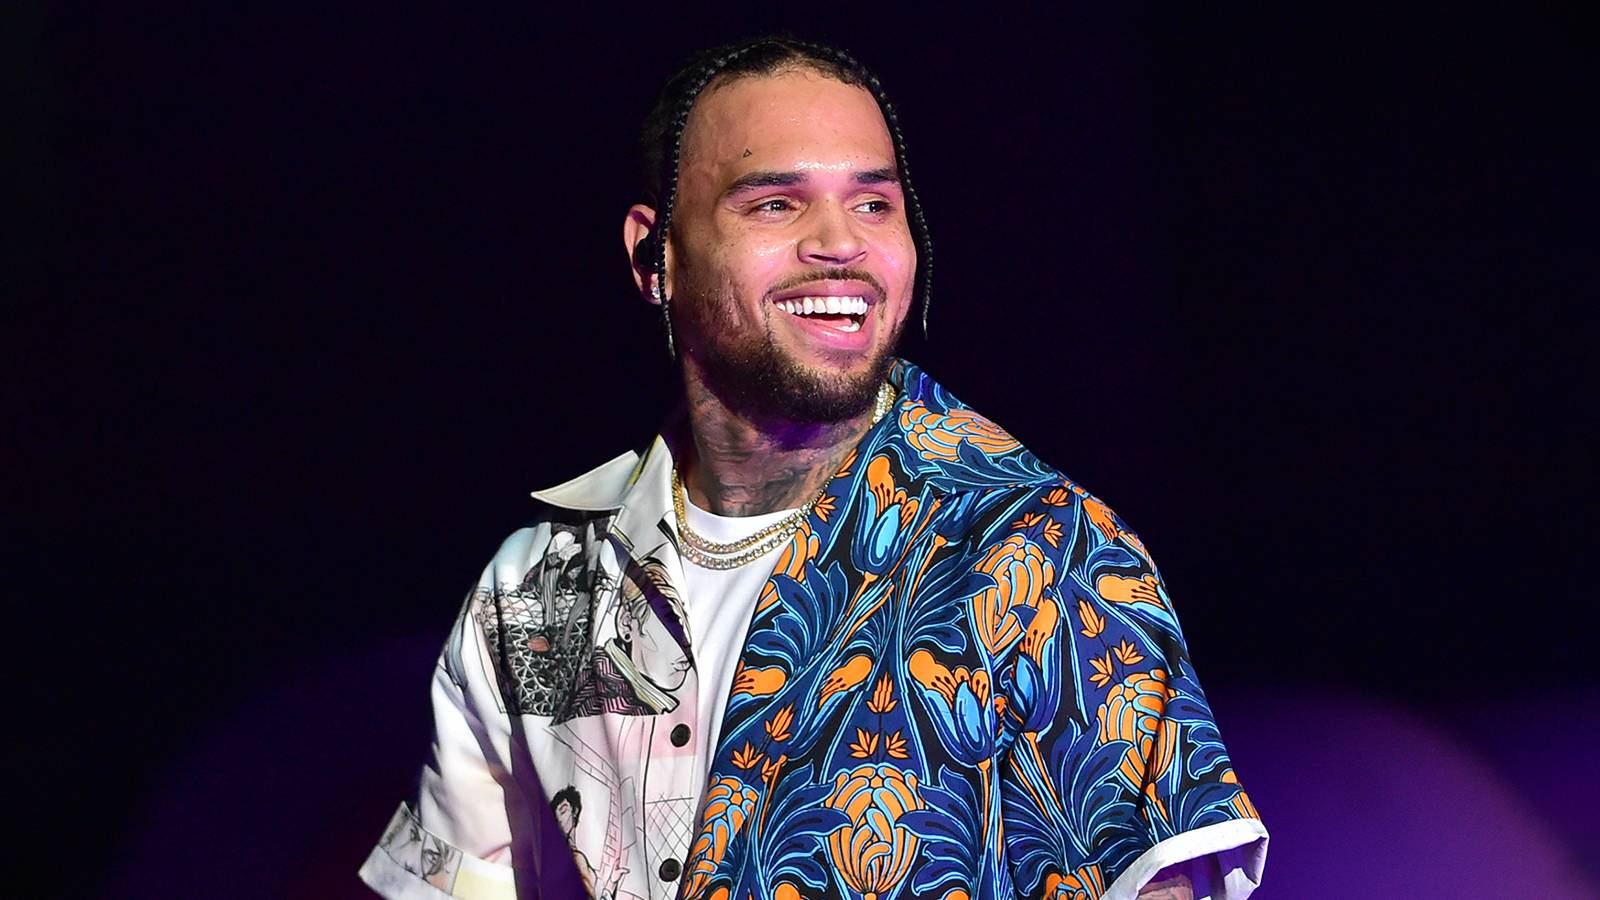 New Breezy!: Chris Brown Shares Release Date And Cover Art For New Album